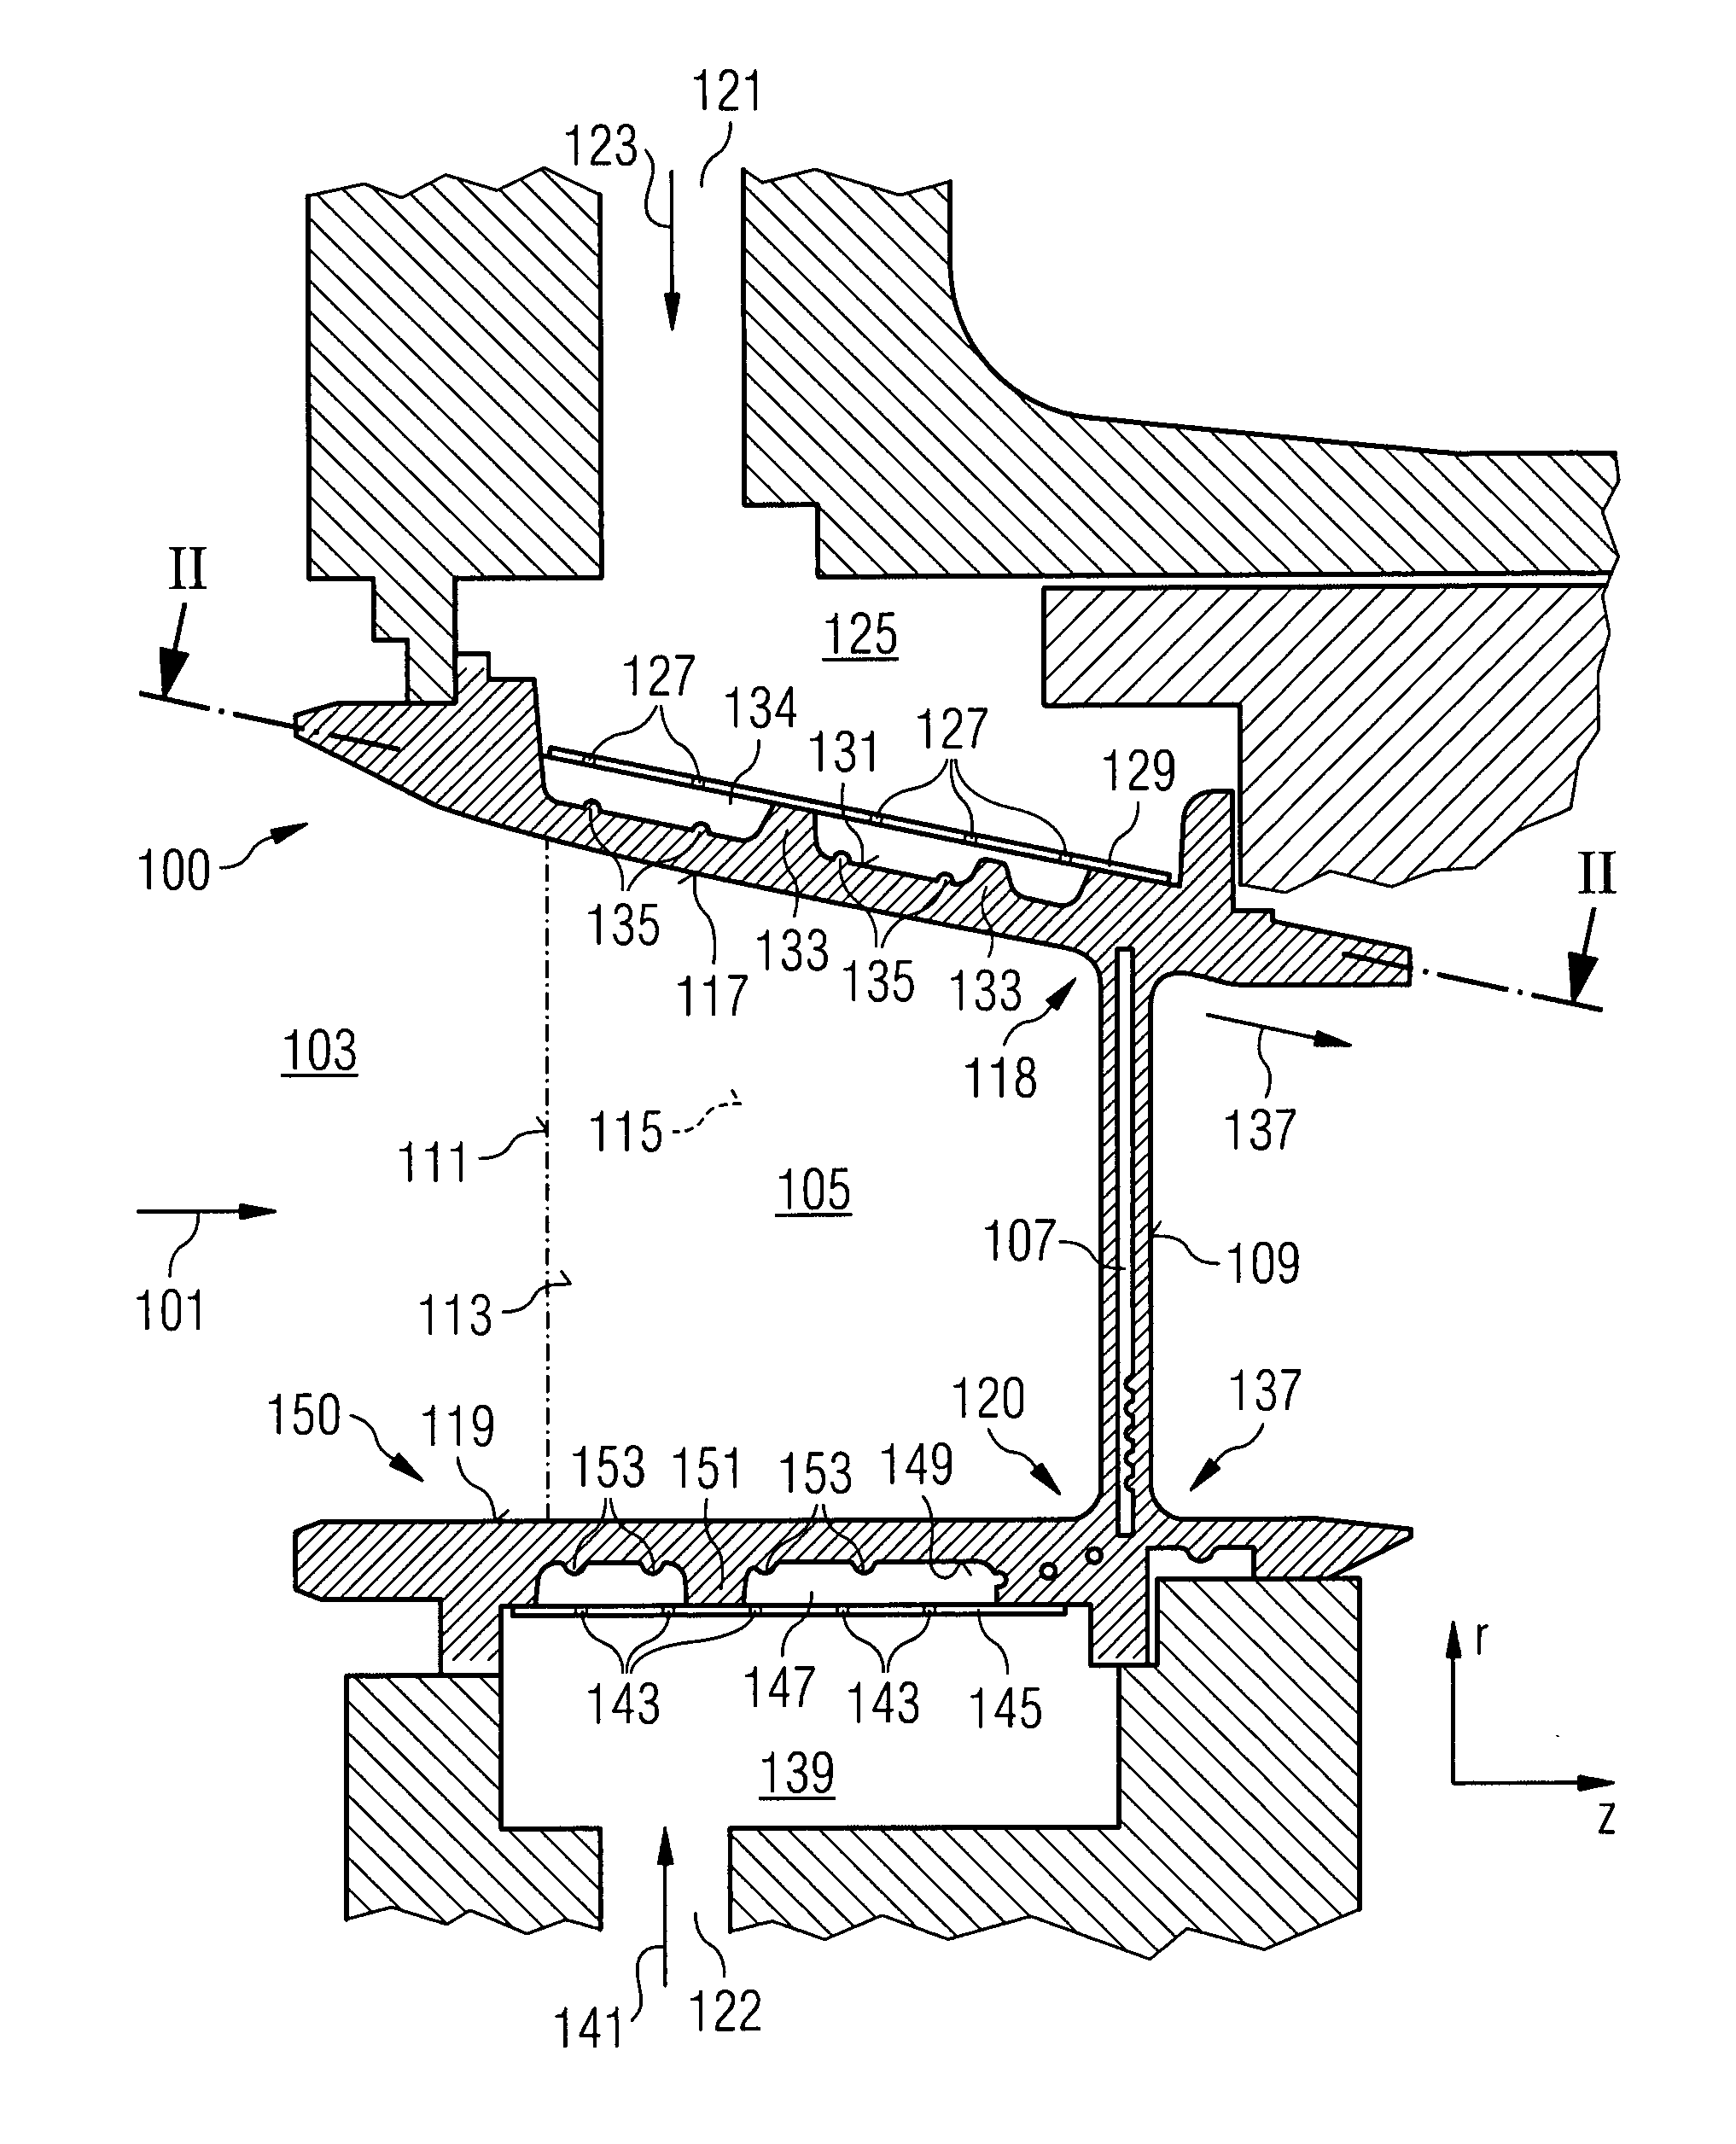 Platform segment for supporting a nozzle guide vane for a gas turbine and nozzle guide vane arrangement for a gas turbine